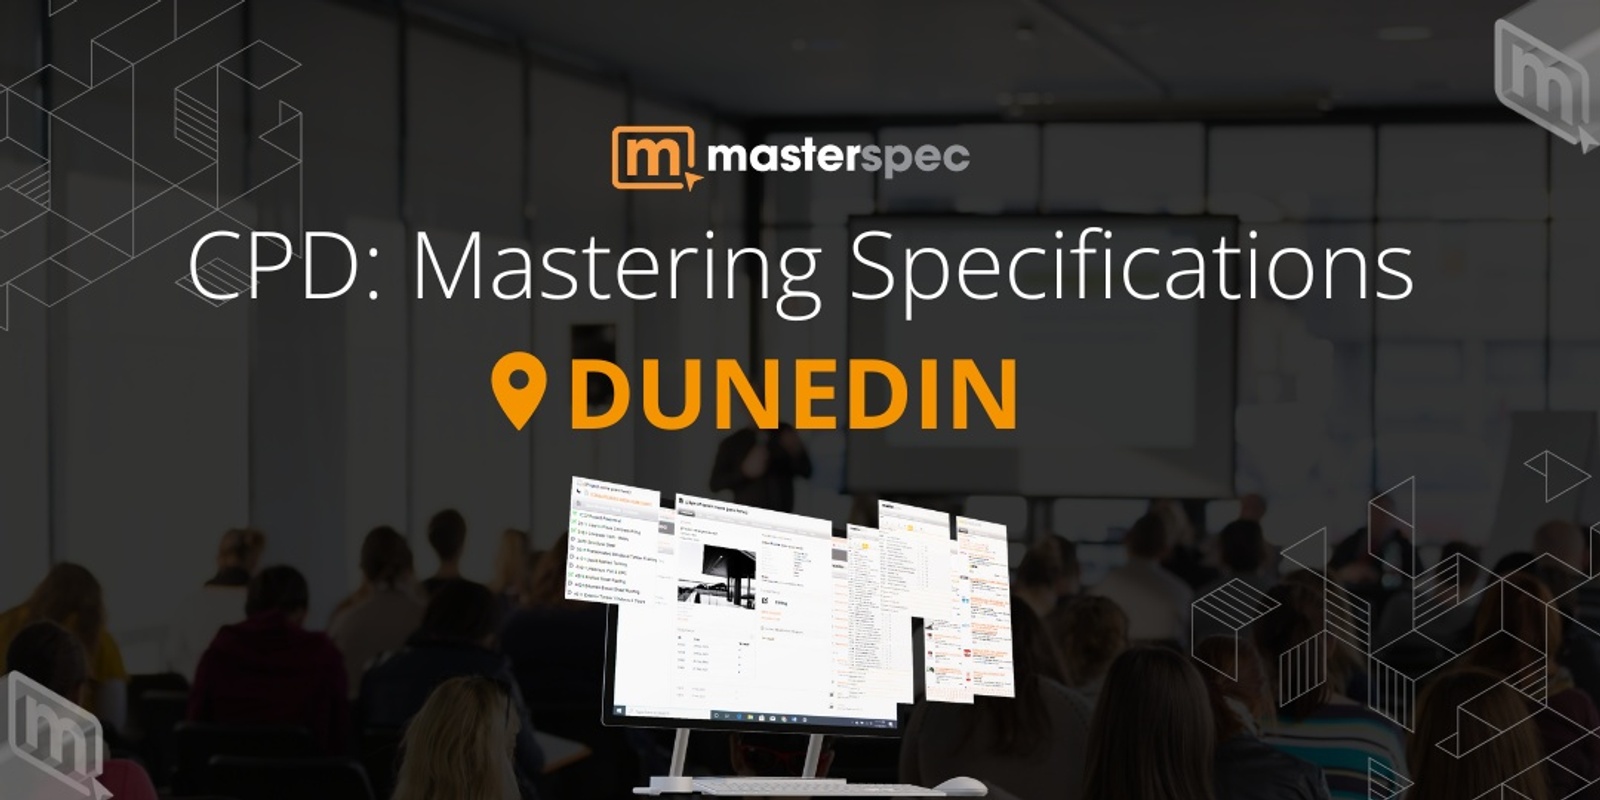 Banner image for CPD: Mastering Masterspec Specifications DUNEDIN | ⭐ 20 CPD Points